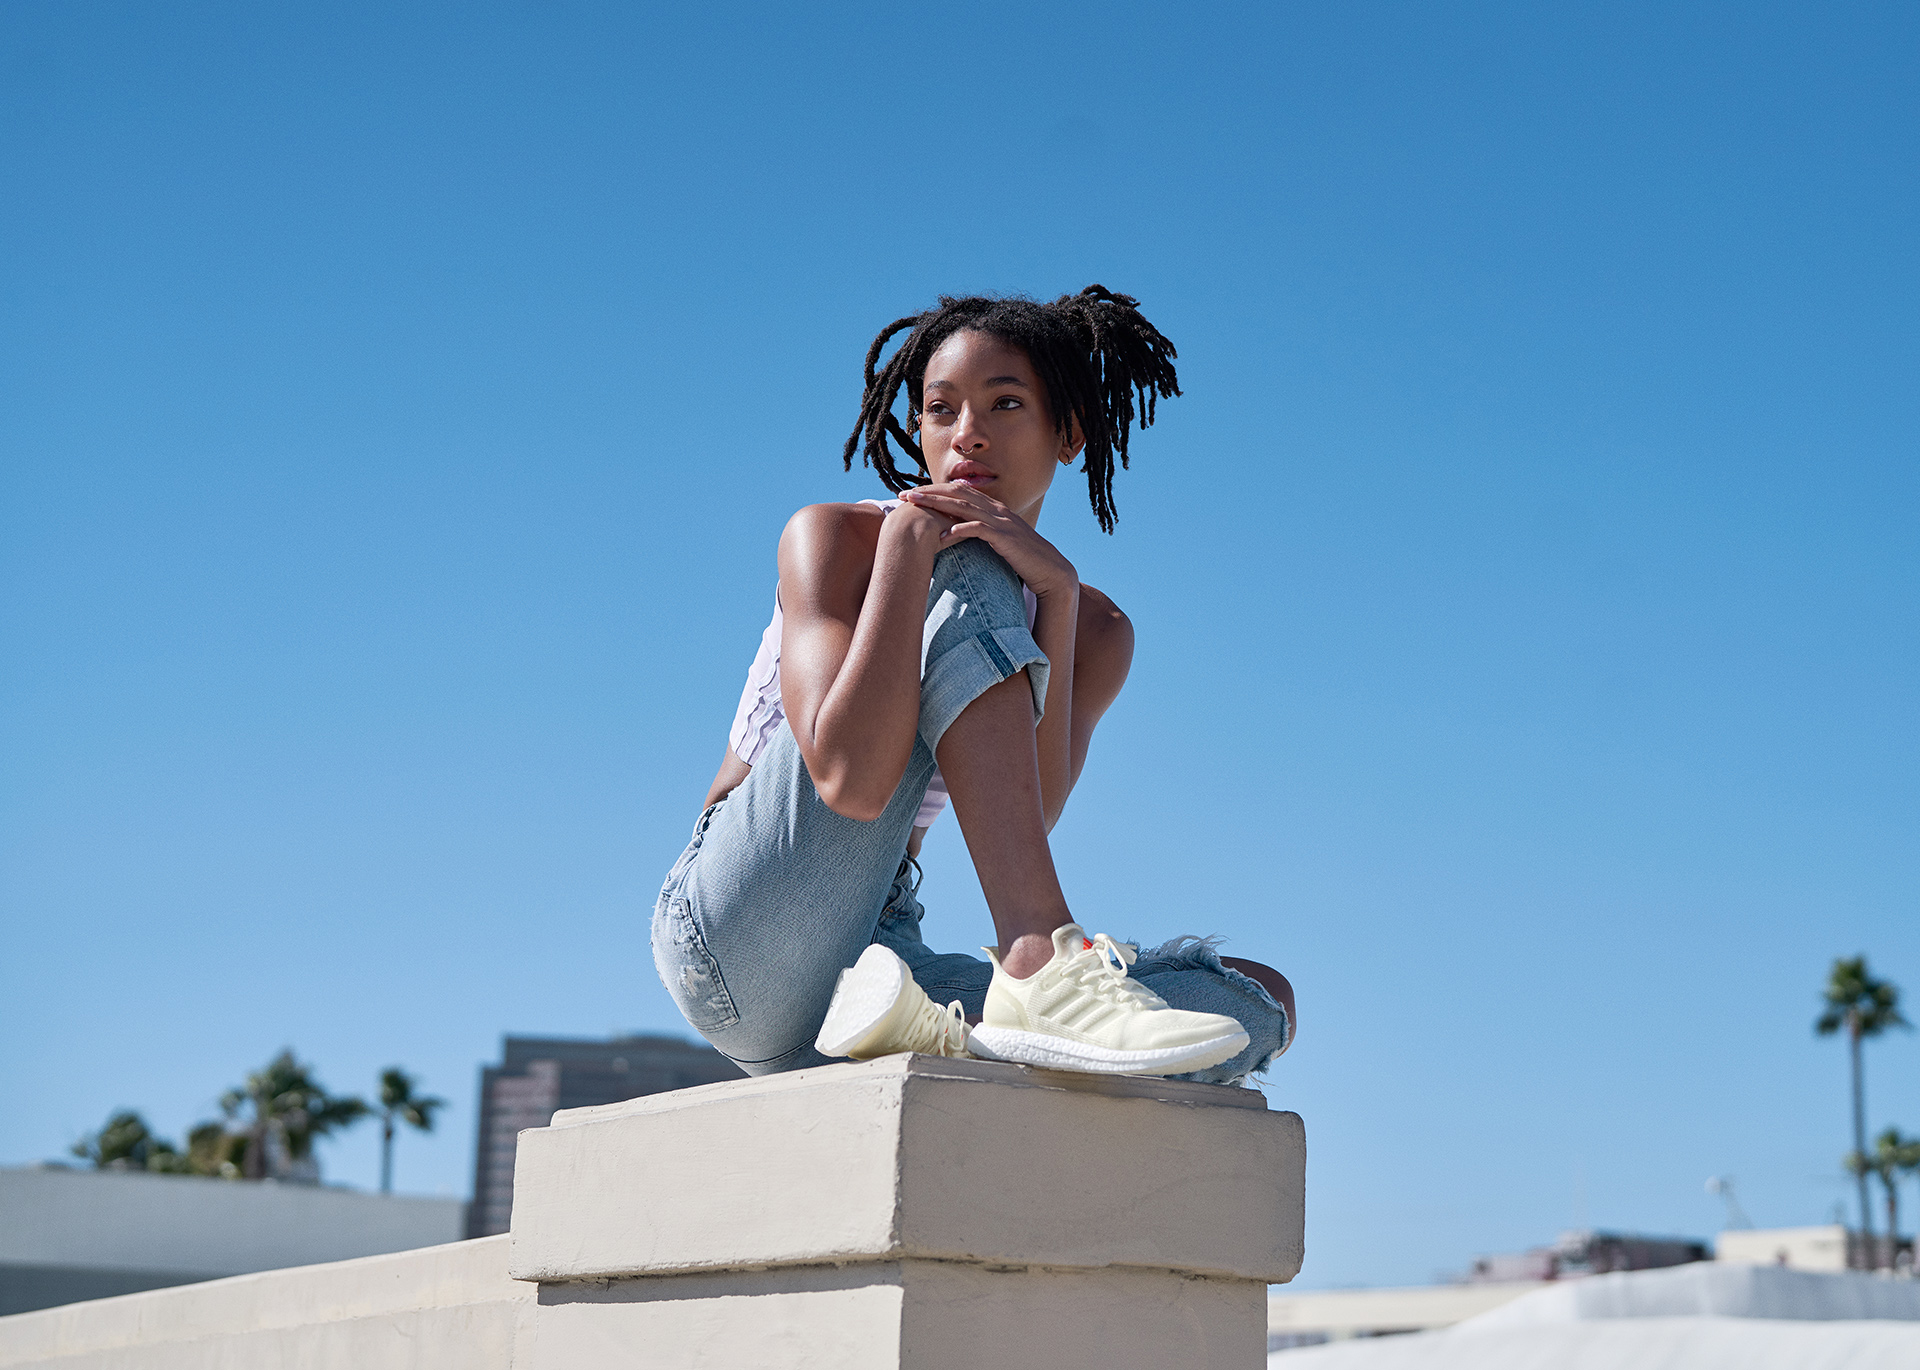 willow smith shoes adidas